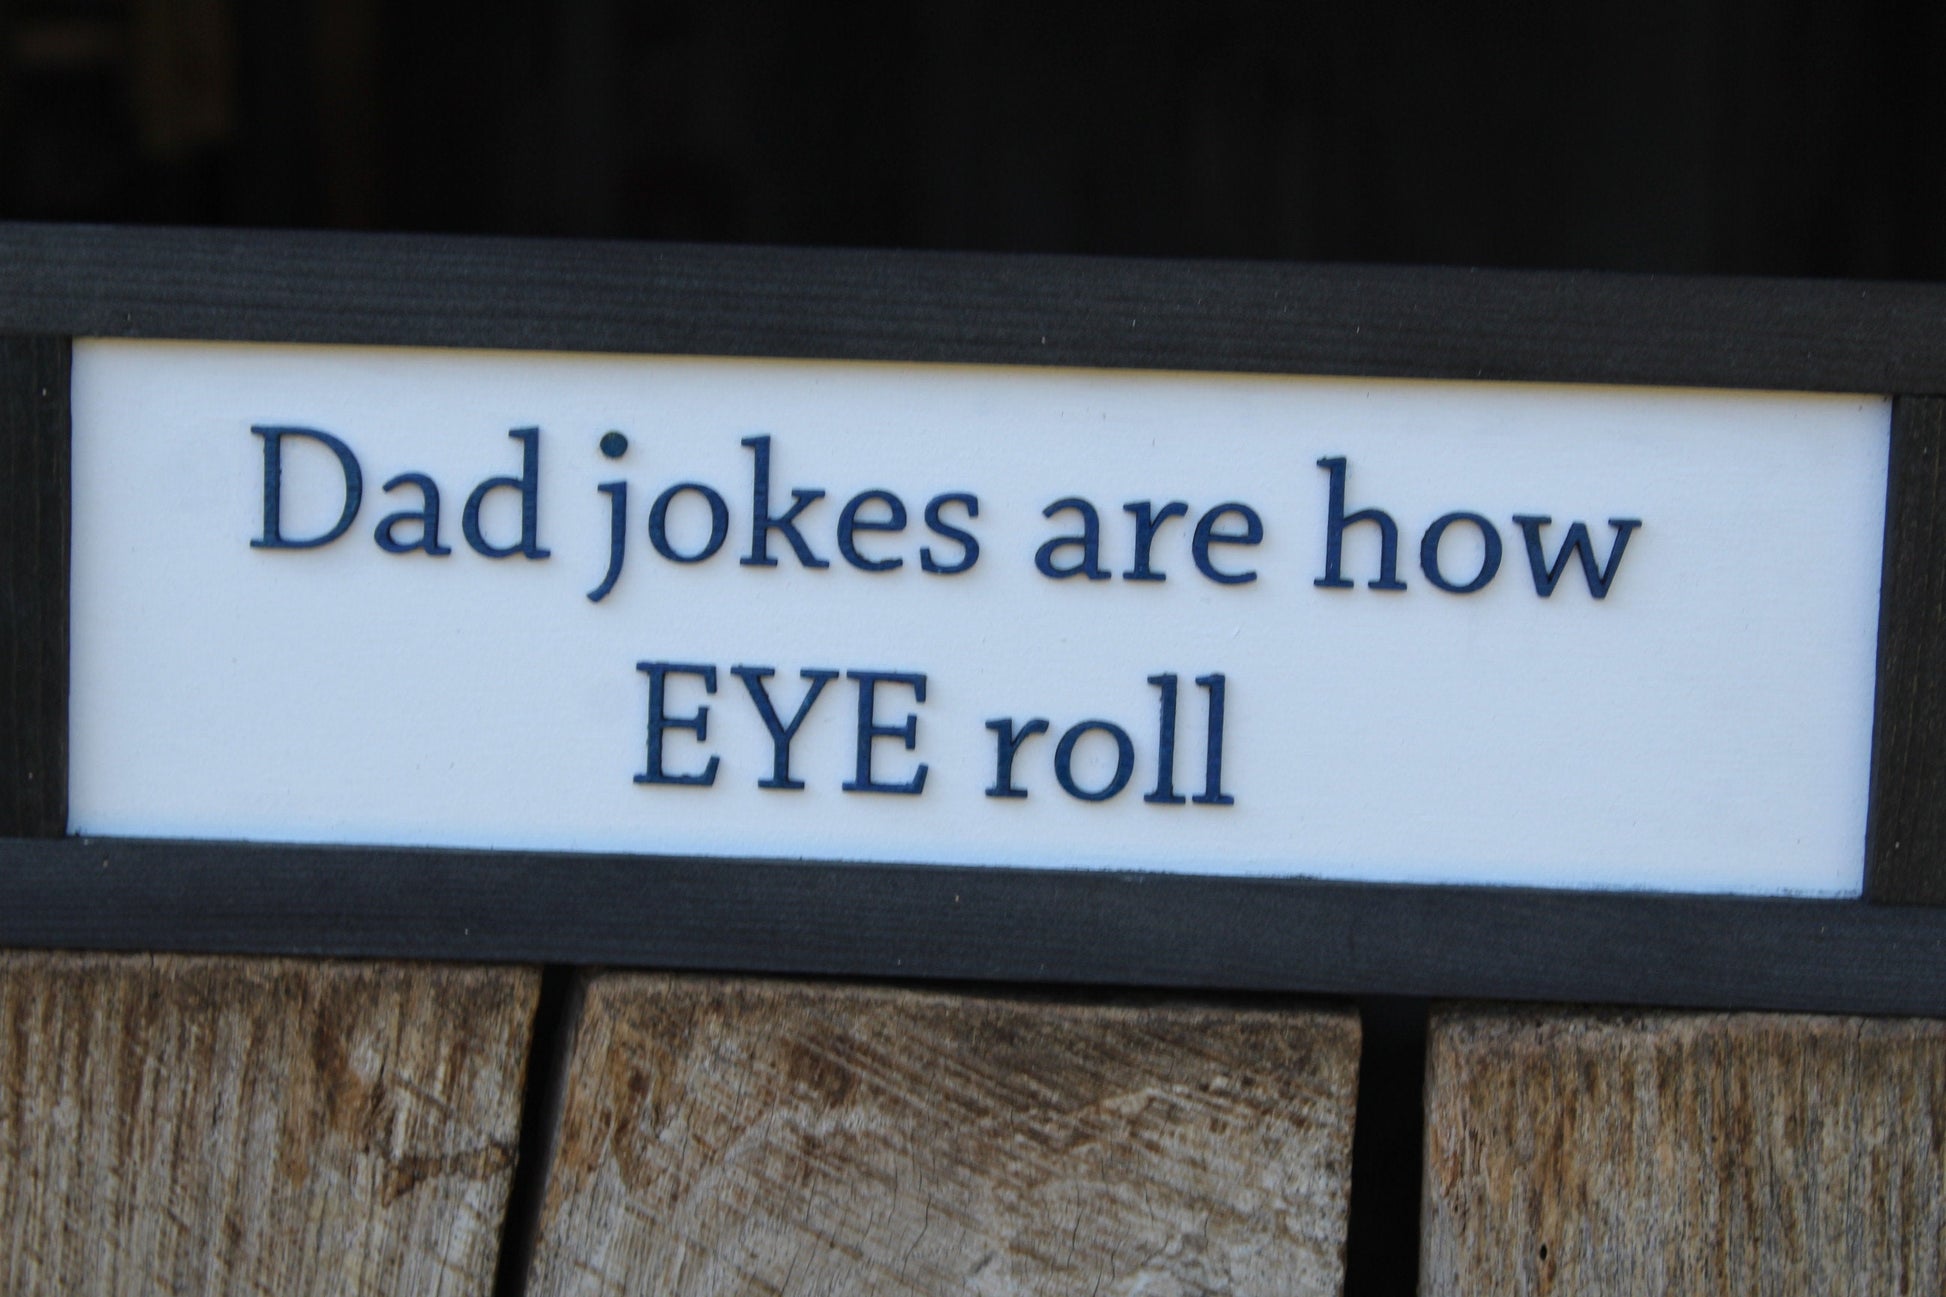 Dad Jokes Are How Eye I Row Silly Fathers Day Gift Pun Wood Sign Text Wall Hanging Decoration Rustic Gift Decor Sarcastic Comedy Gag Gift